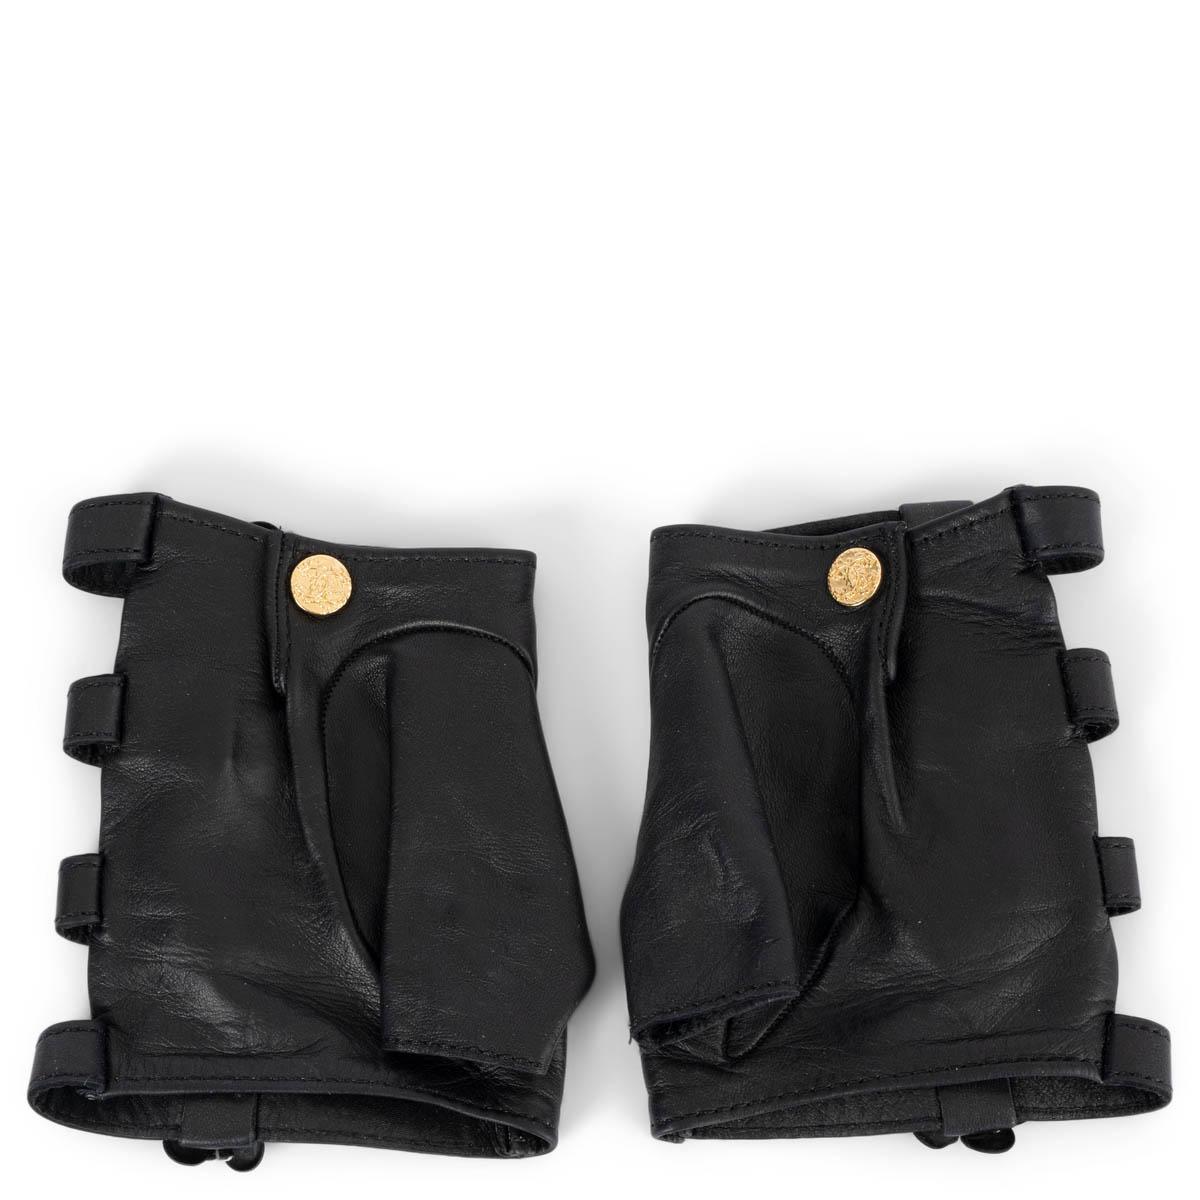 100% authentic Chanel fingerless cut-out gloves in black soft lambskin embellished with Camellia's and a gold-tone push-button. Have been worn and the leather has soft patina on the inside. Overall in excellent condition. 

Measurements
Width	16cm